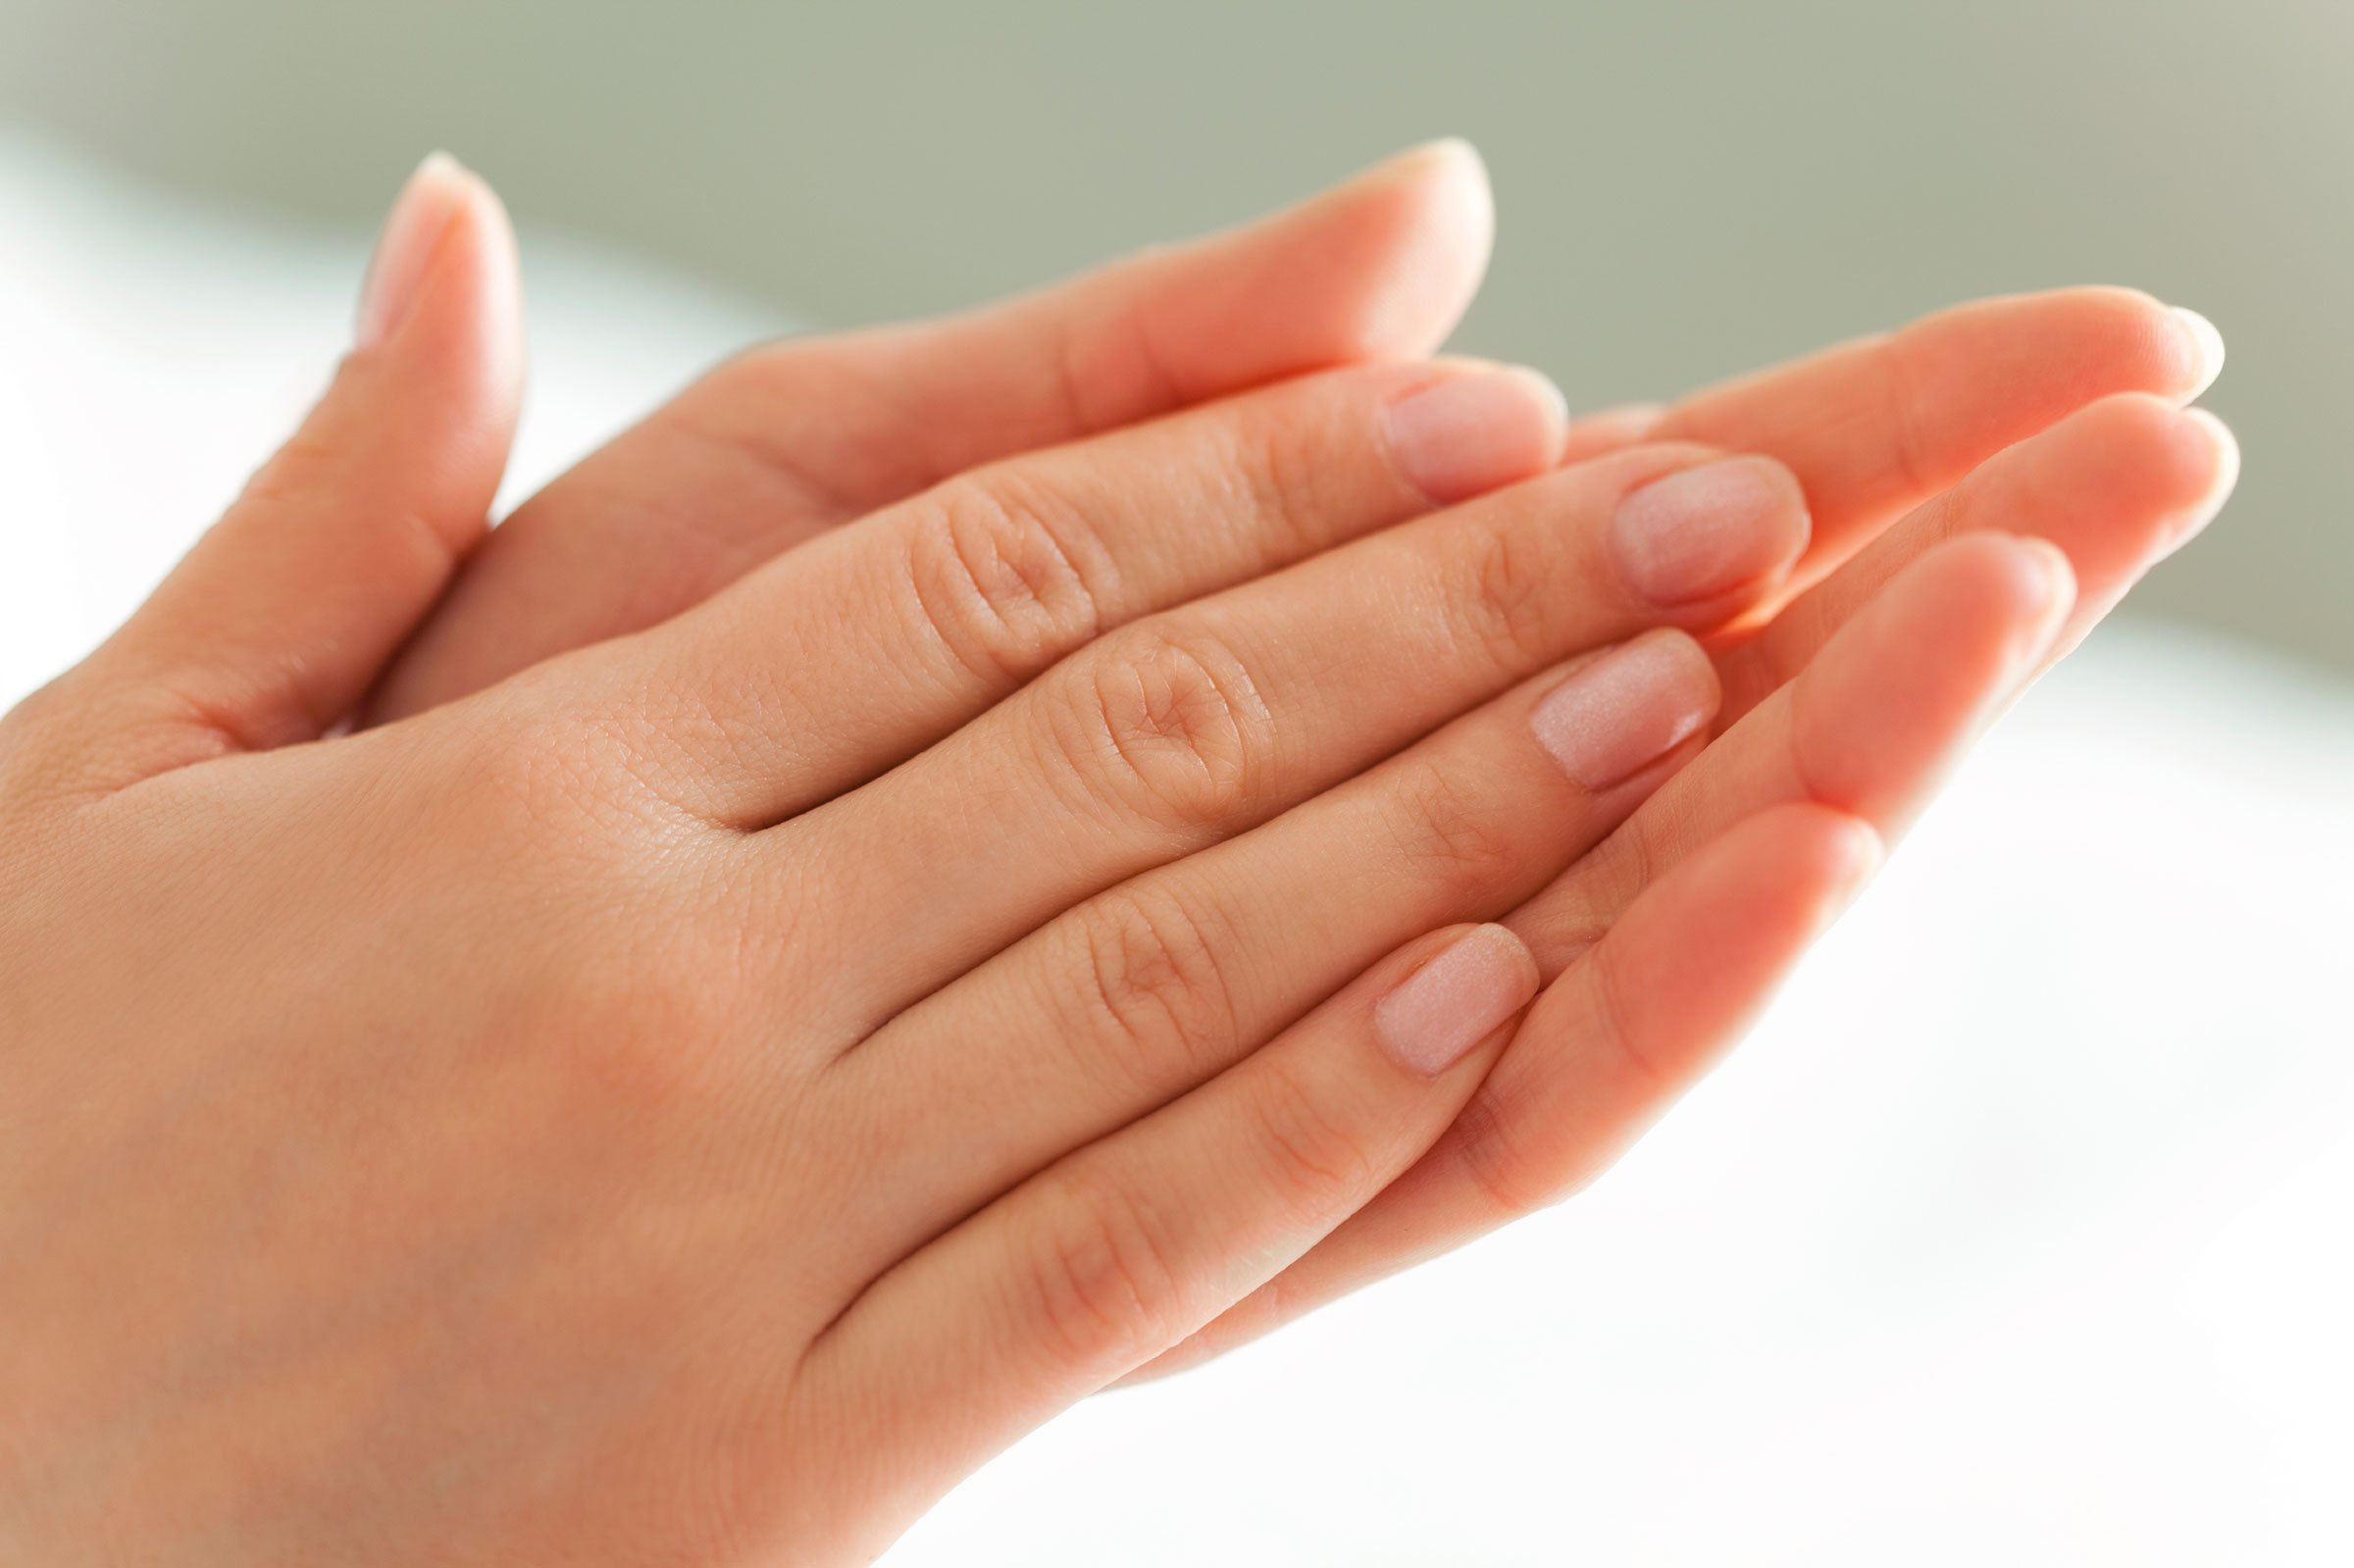 6 Diseases Your Hands Can Predict | Reader's Digest